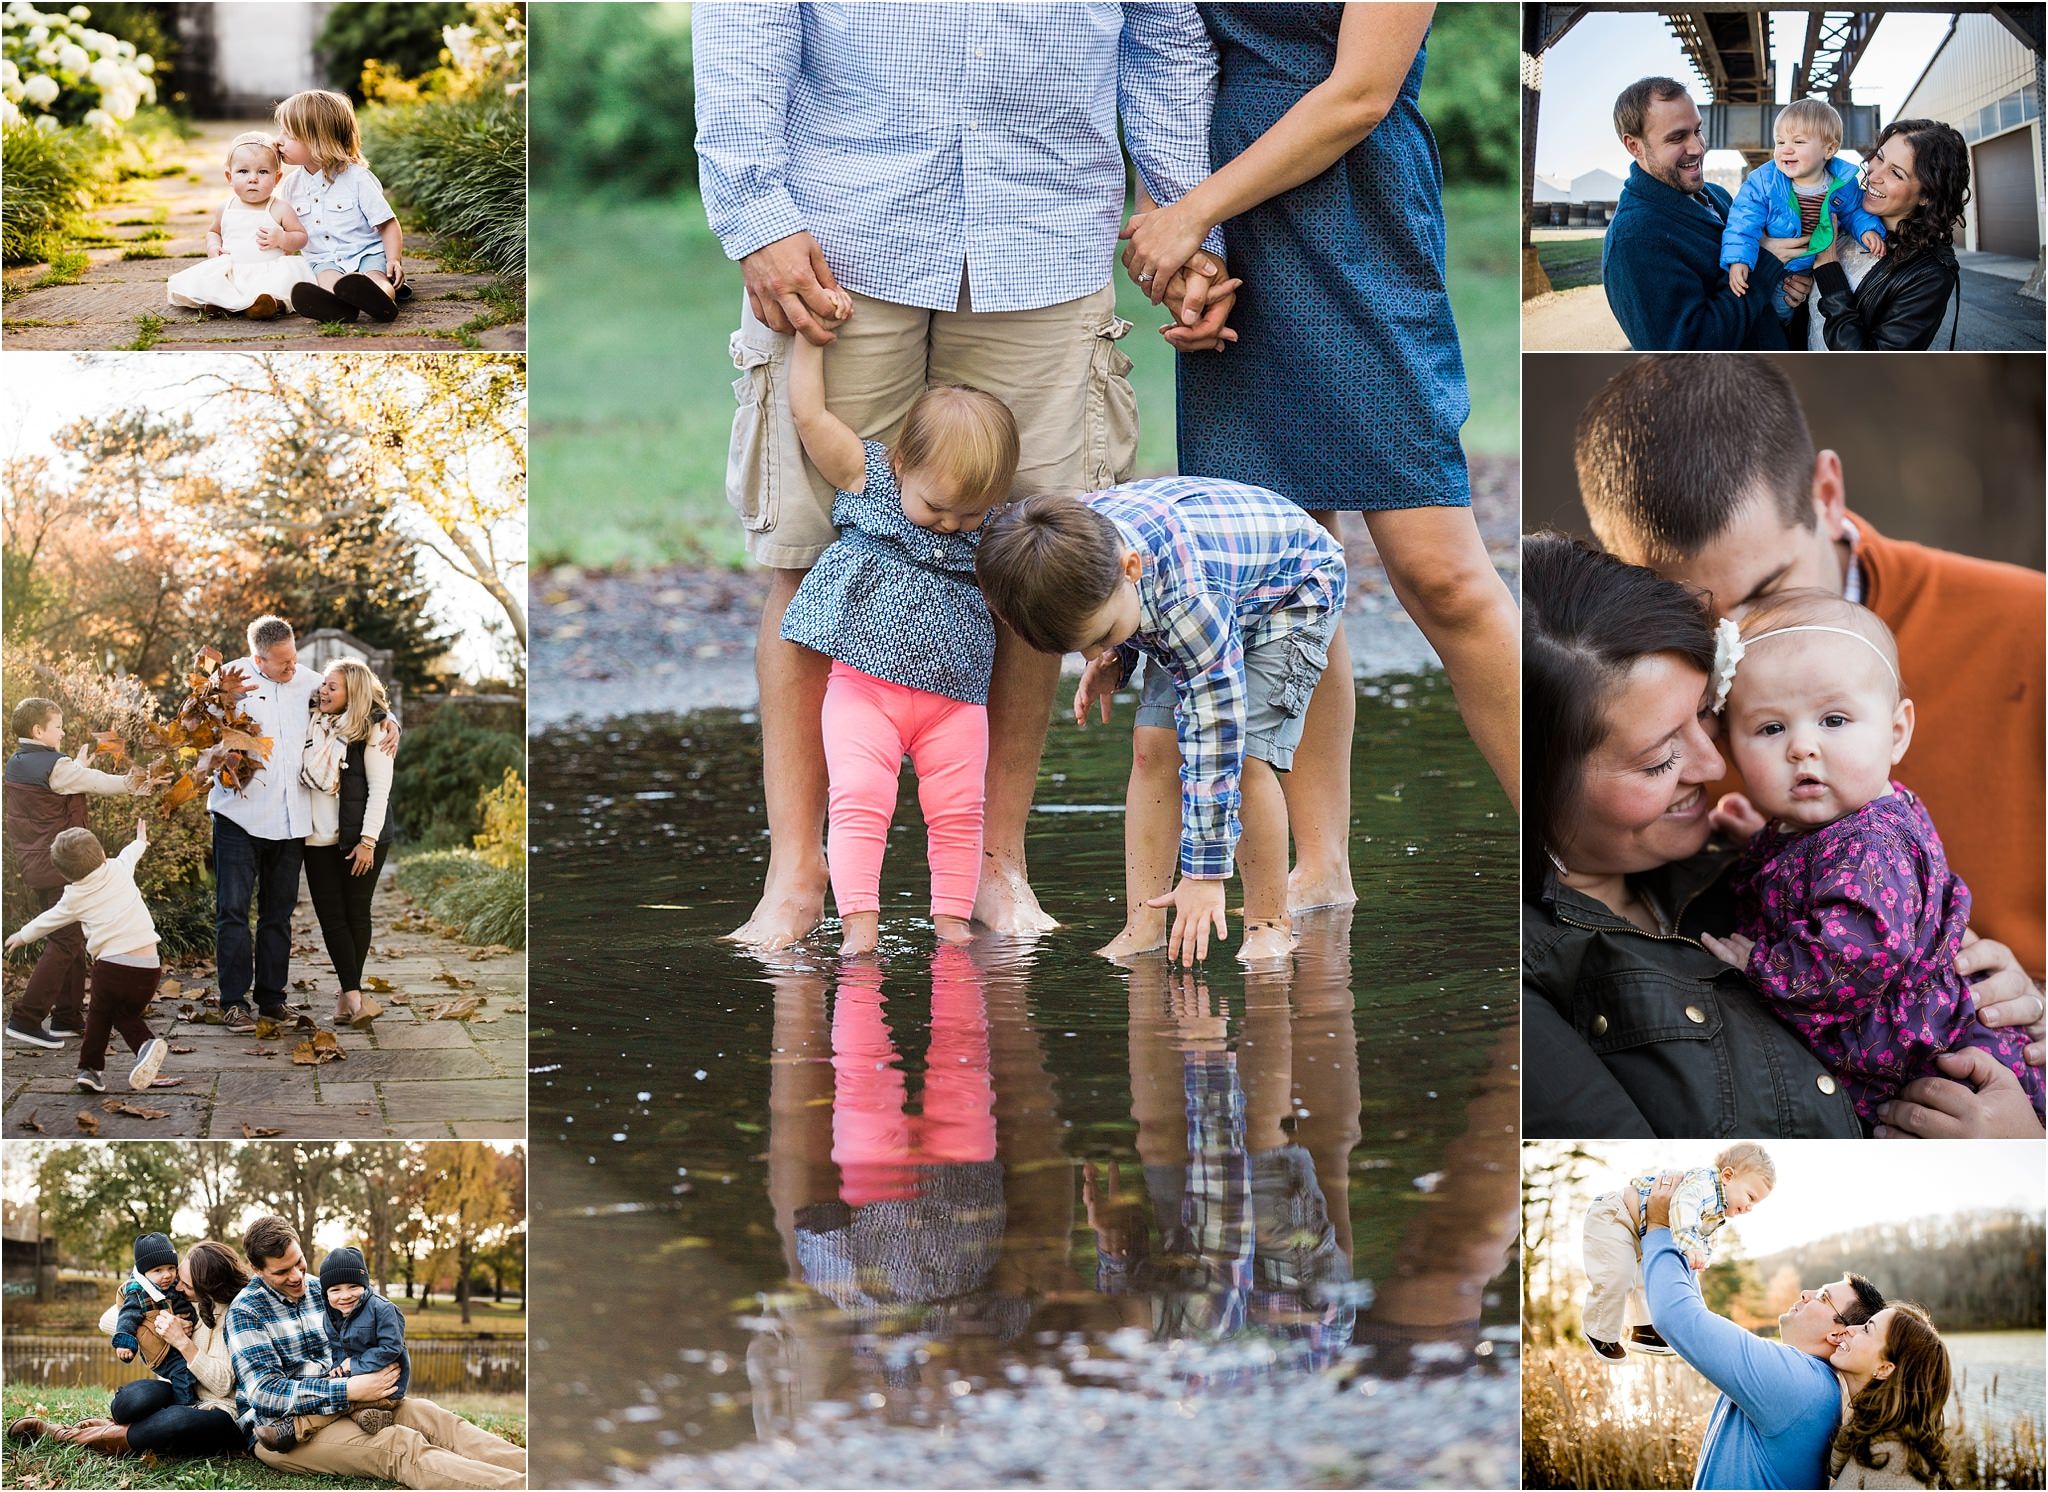 Outdoor Family Photos In Pittsburgh, PA